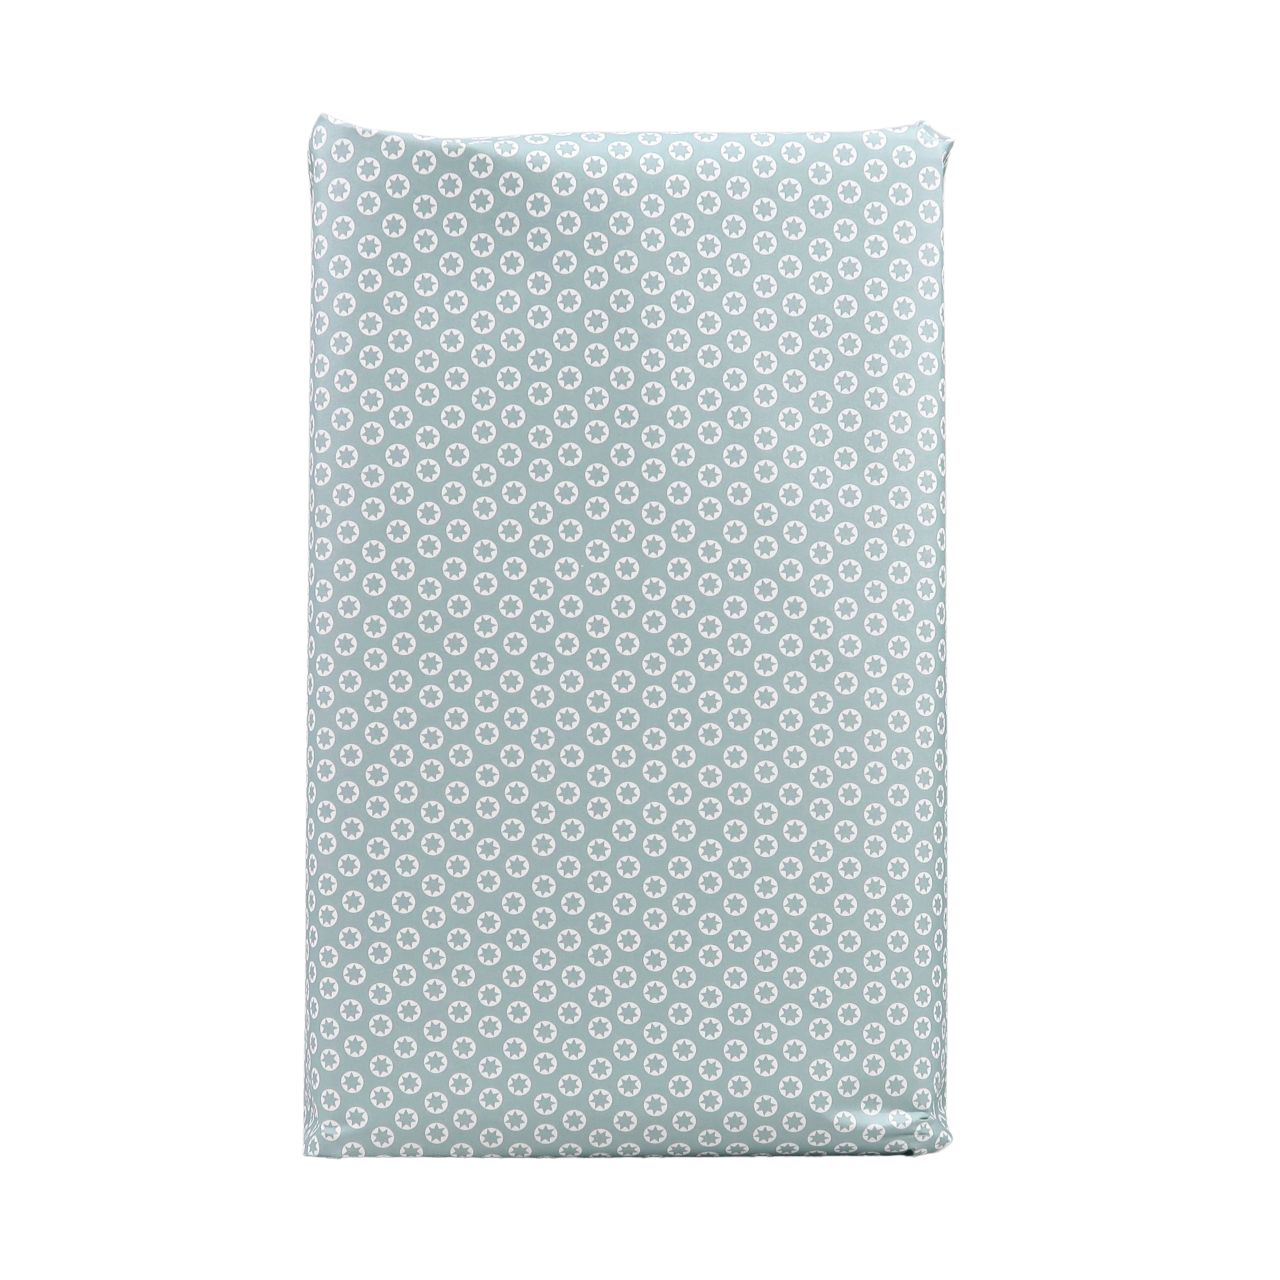 Ola 10 Sheets of Patterned Paper - Tiny Stars Nile Blue